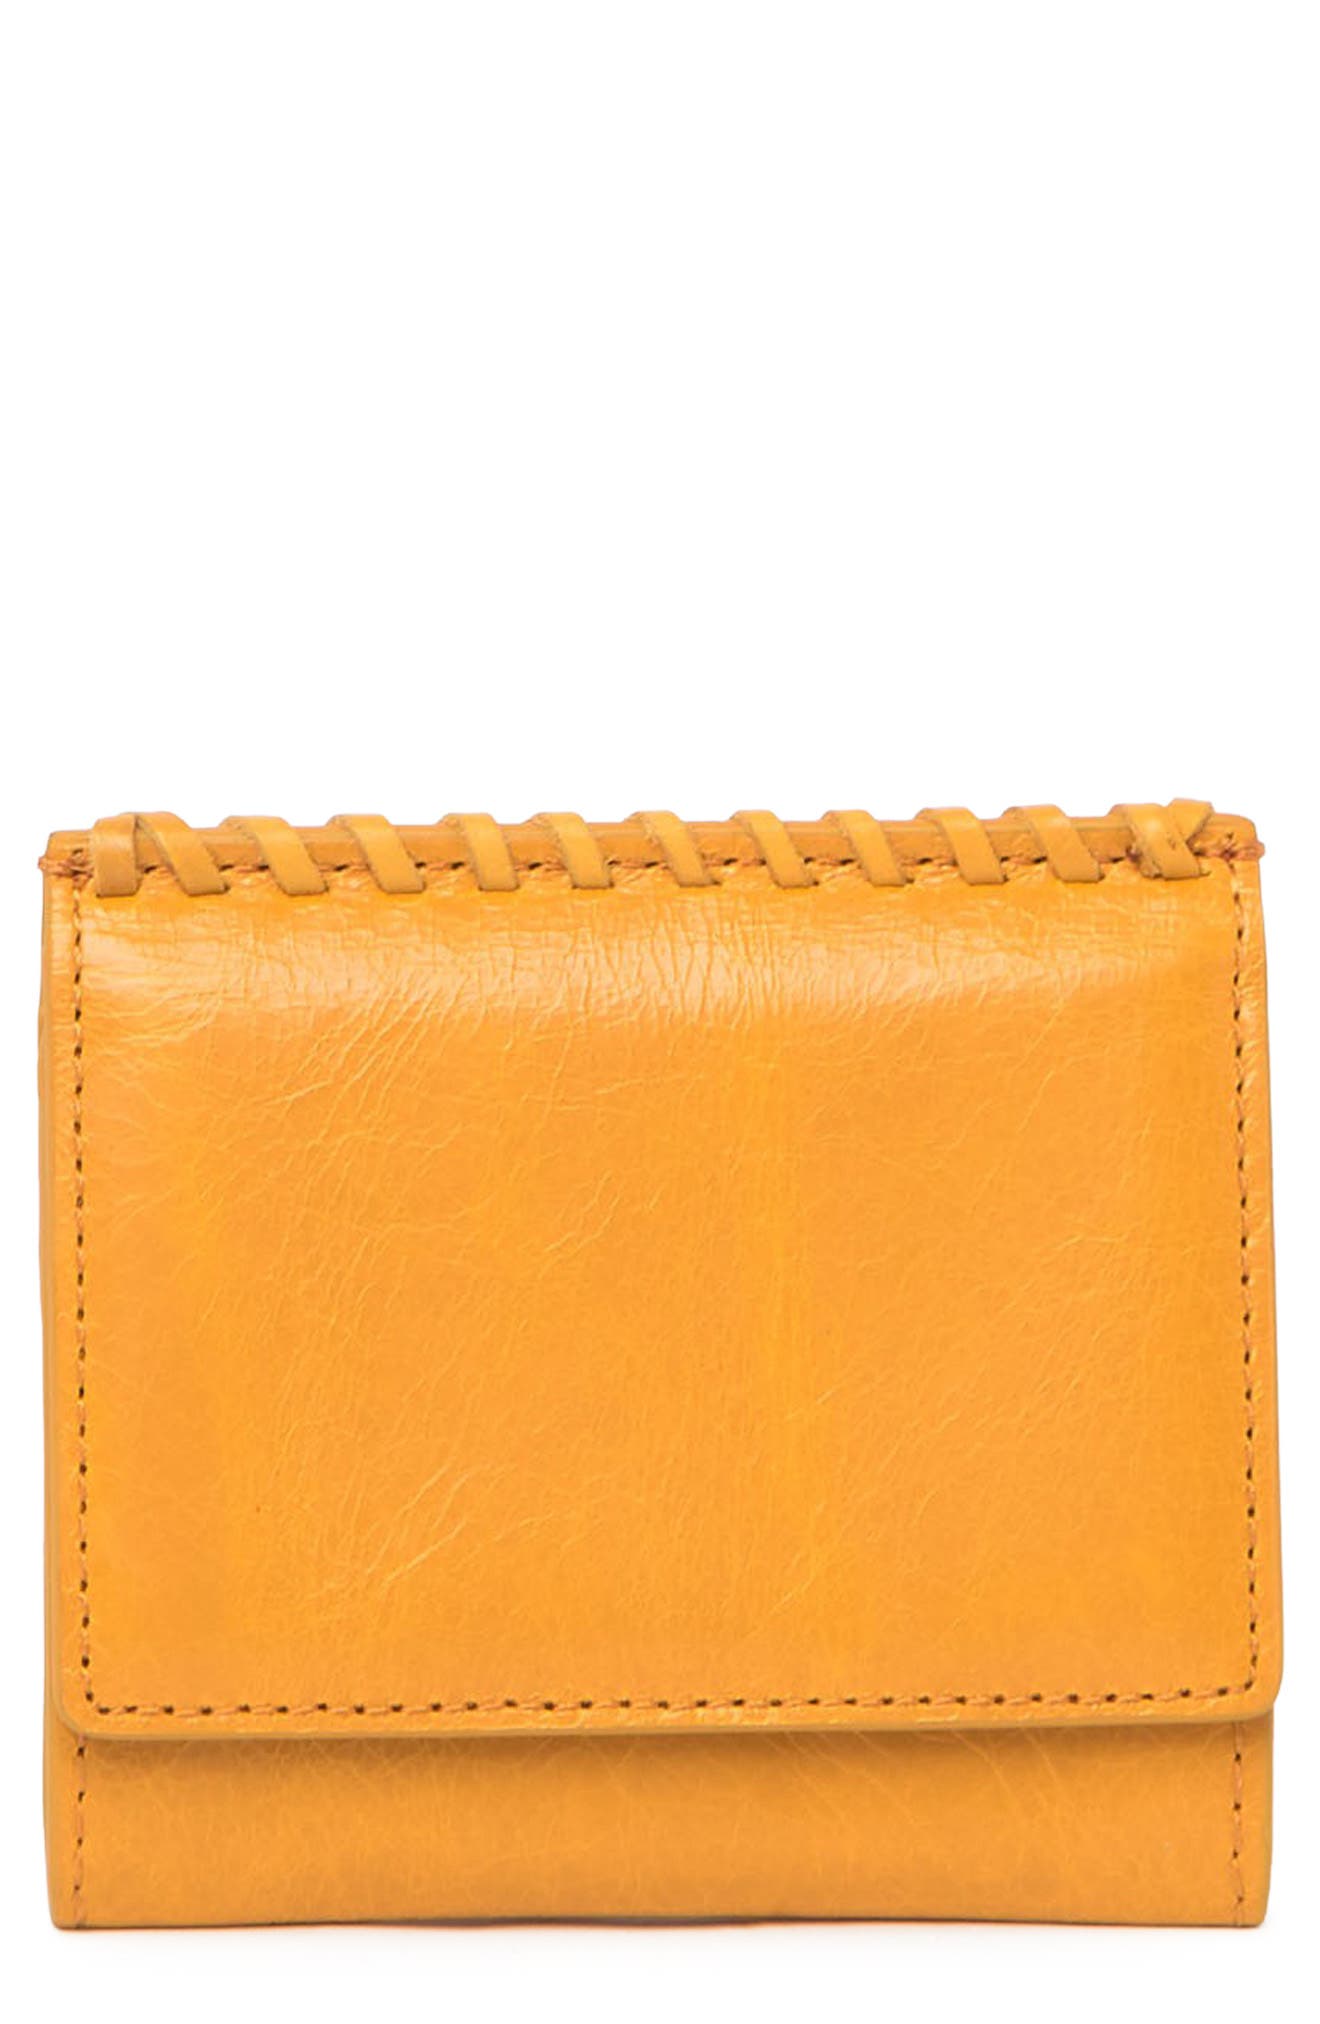 Hobo Stitch Woven Leather Bifold Wallet In Gold3